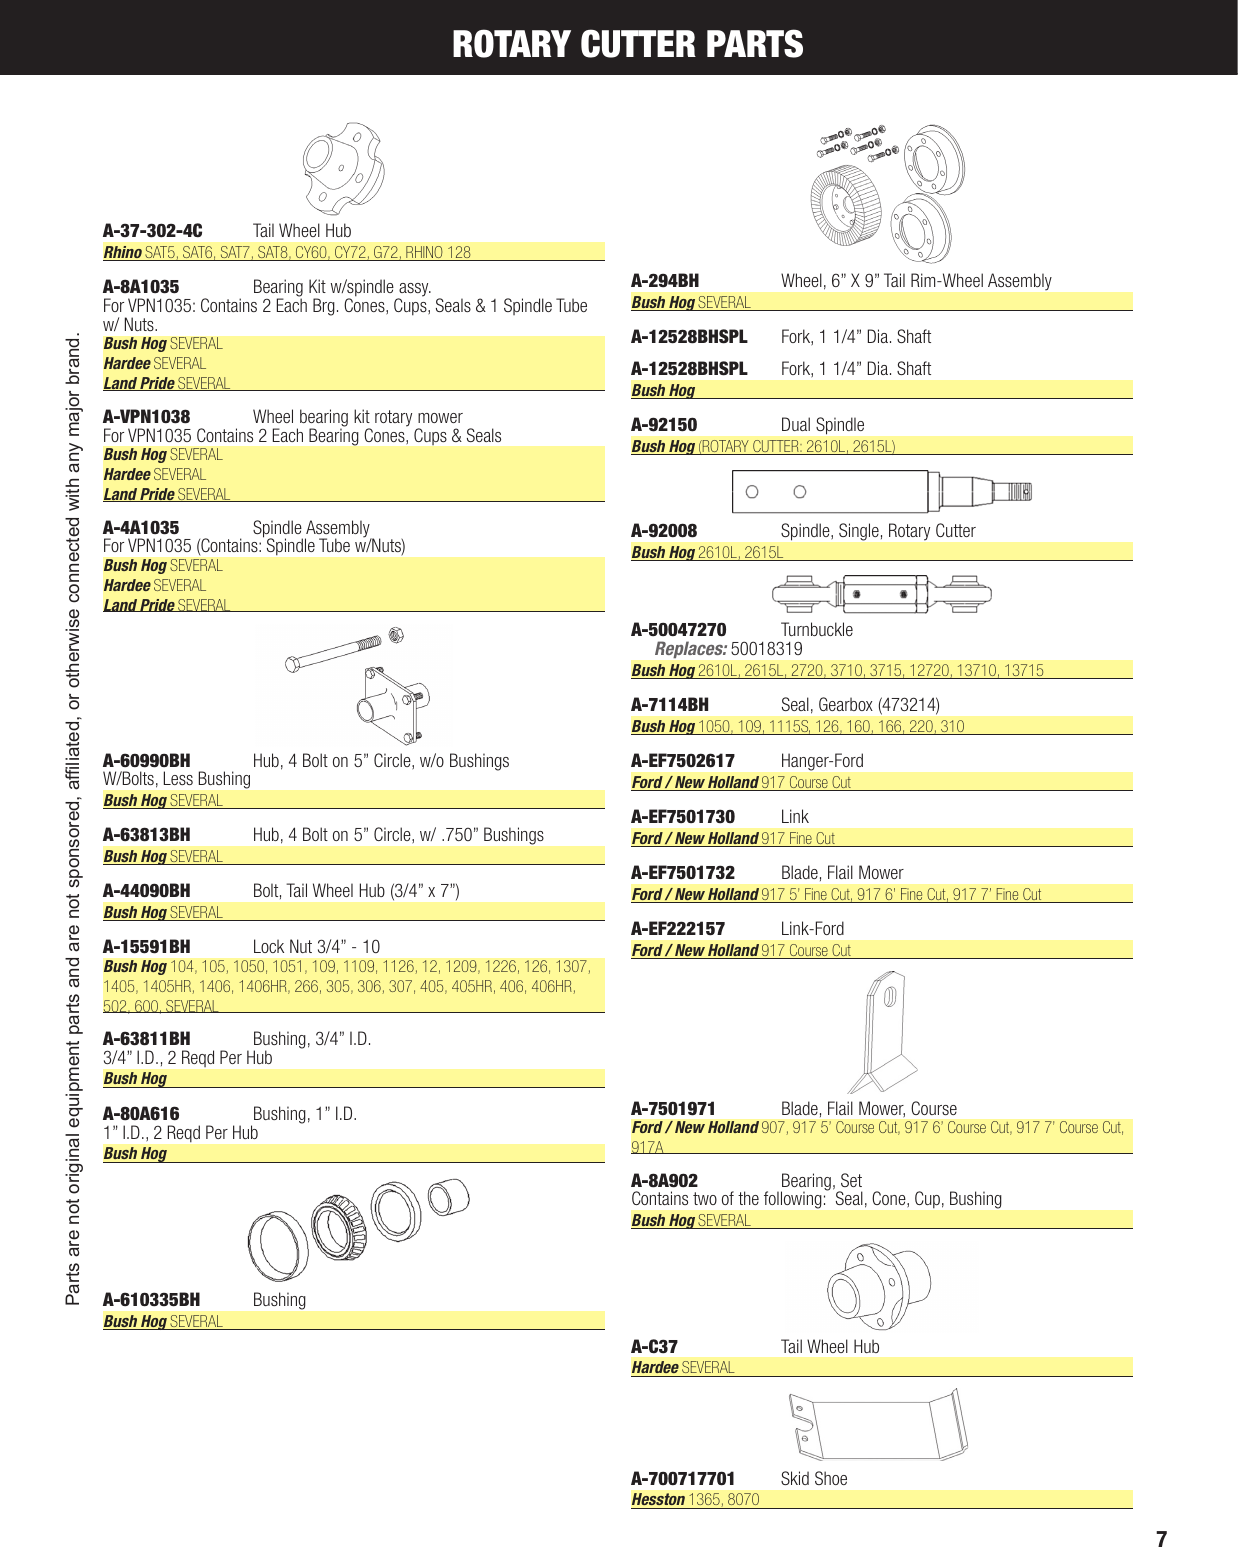 Page 7 of 8 - Hay Tool - Rotary Cutter Parts  !! Rotary-cutter-parts